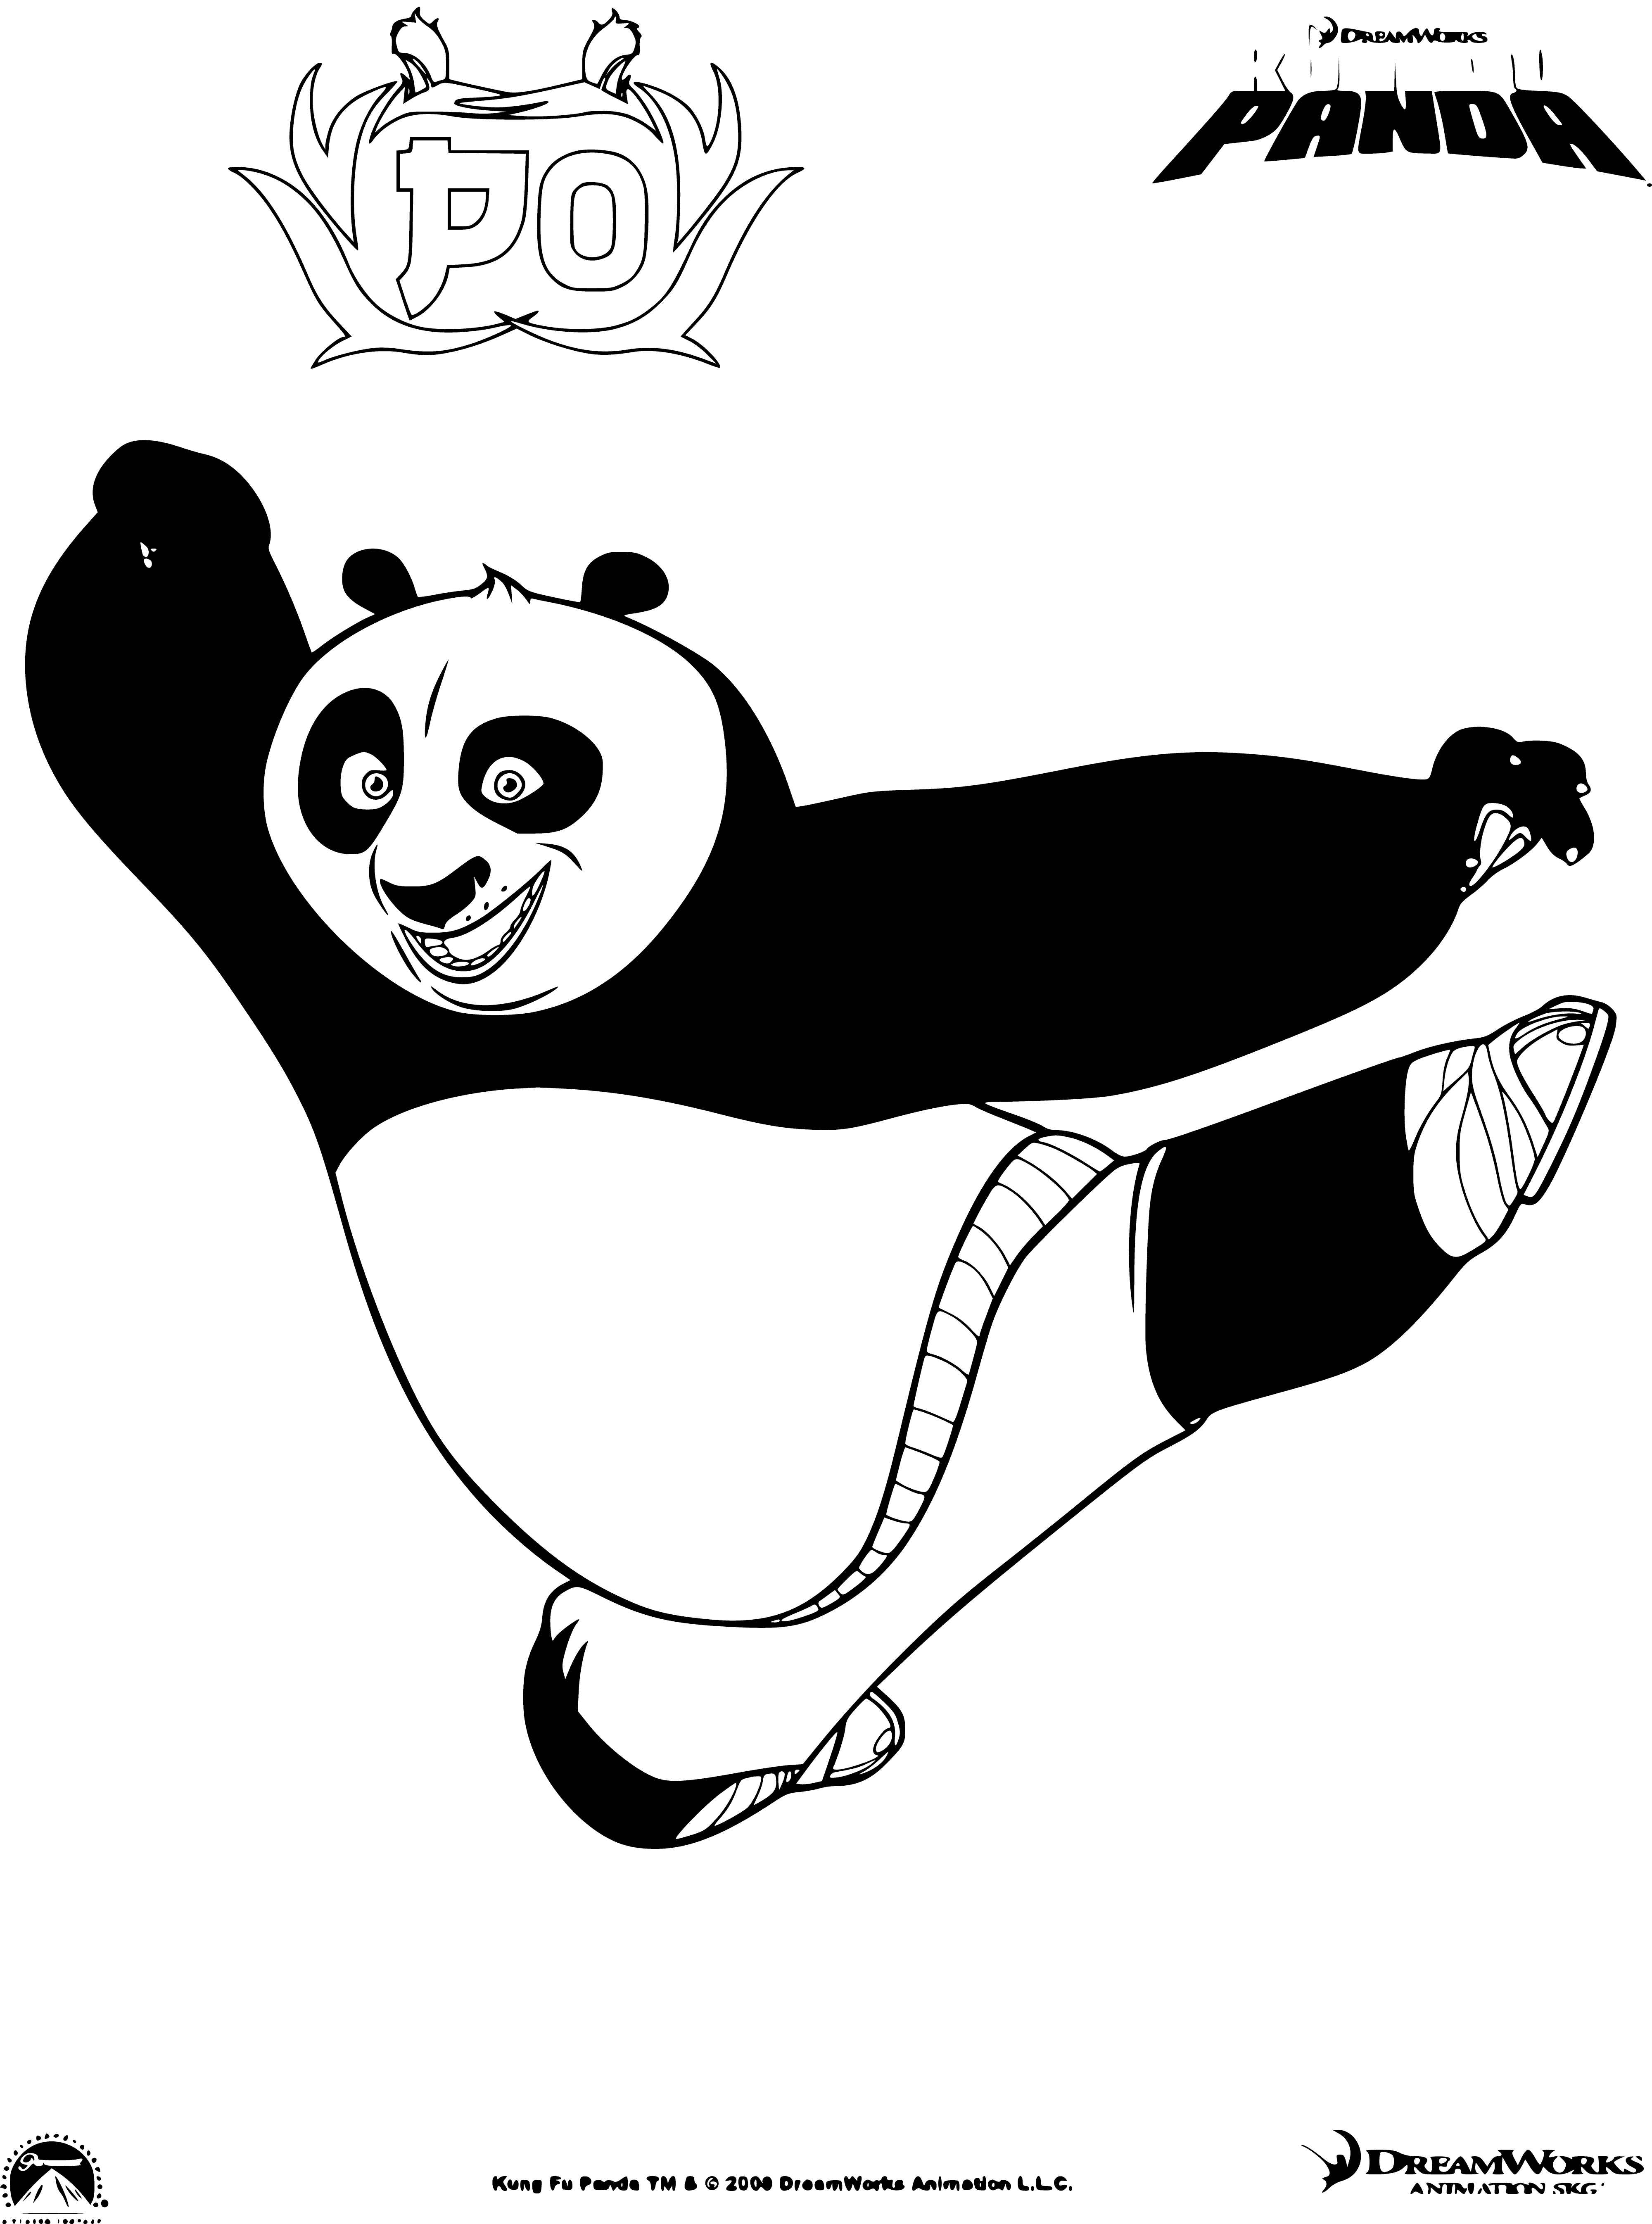 coloring page: The Kung Fu Panda is a furry creature with black & white fur, standing on hind legs & using its paws to punch & kick. #KungFuPanda